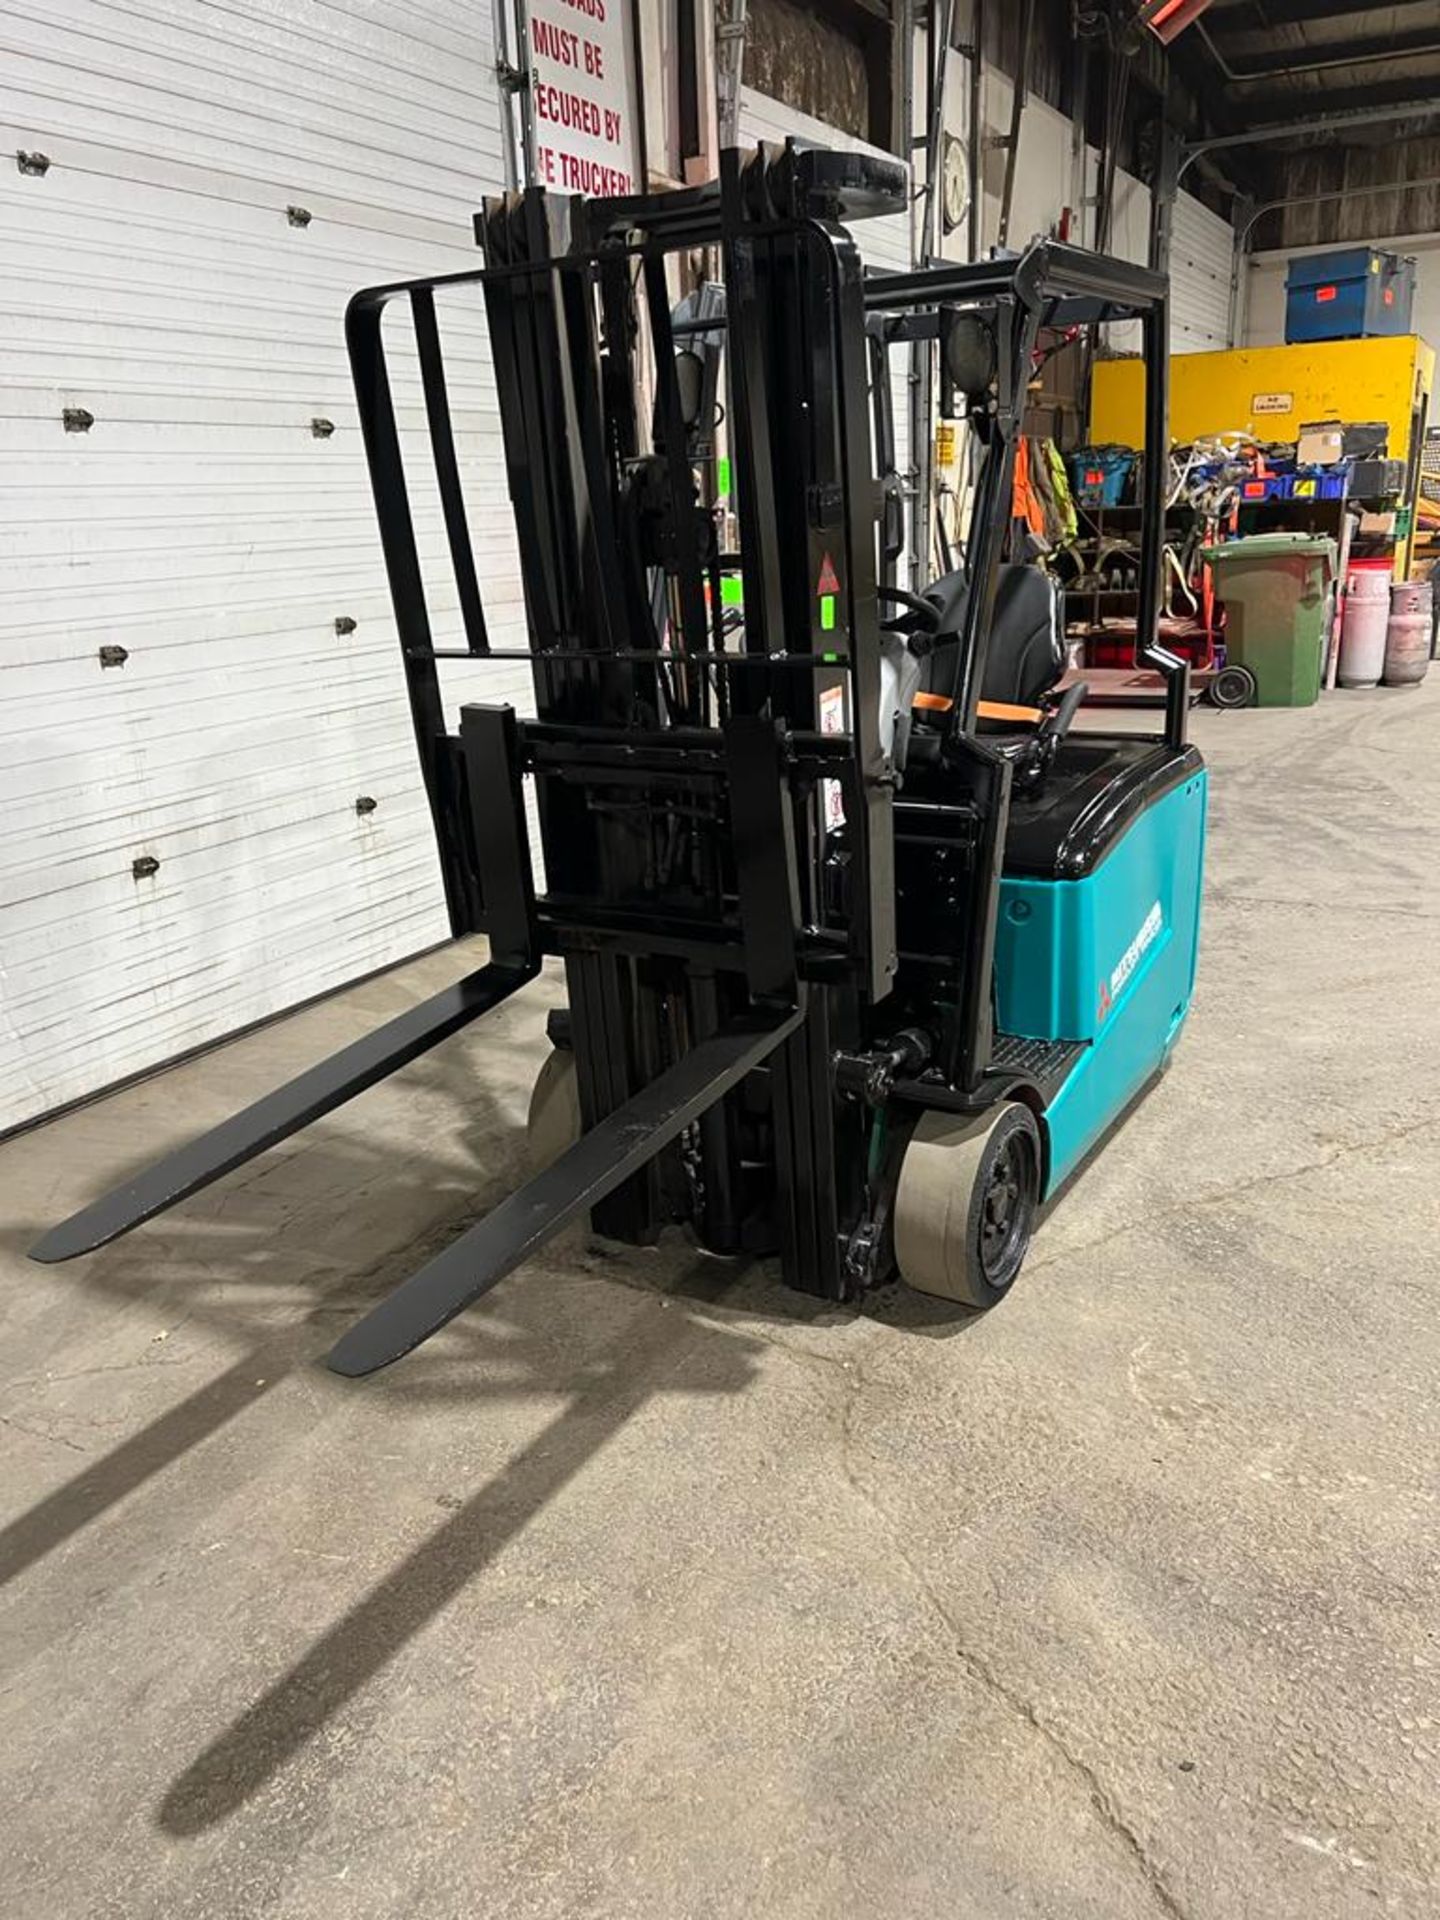 2018 Mitsubishi 3,000lbs Capacity Forklift 3-Wheel with 48V Battery with sideshift & 3-stage - Image 3 of 4